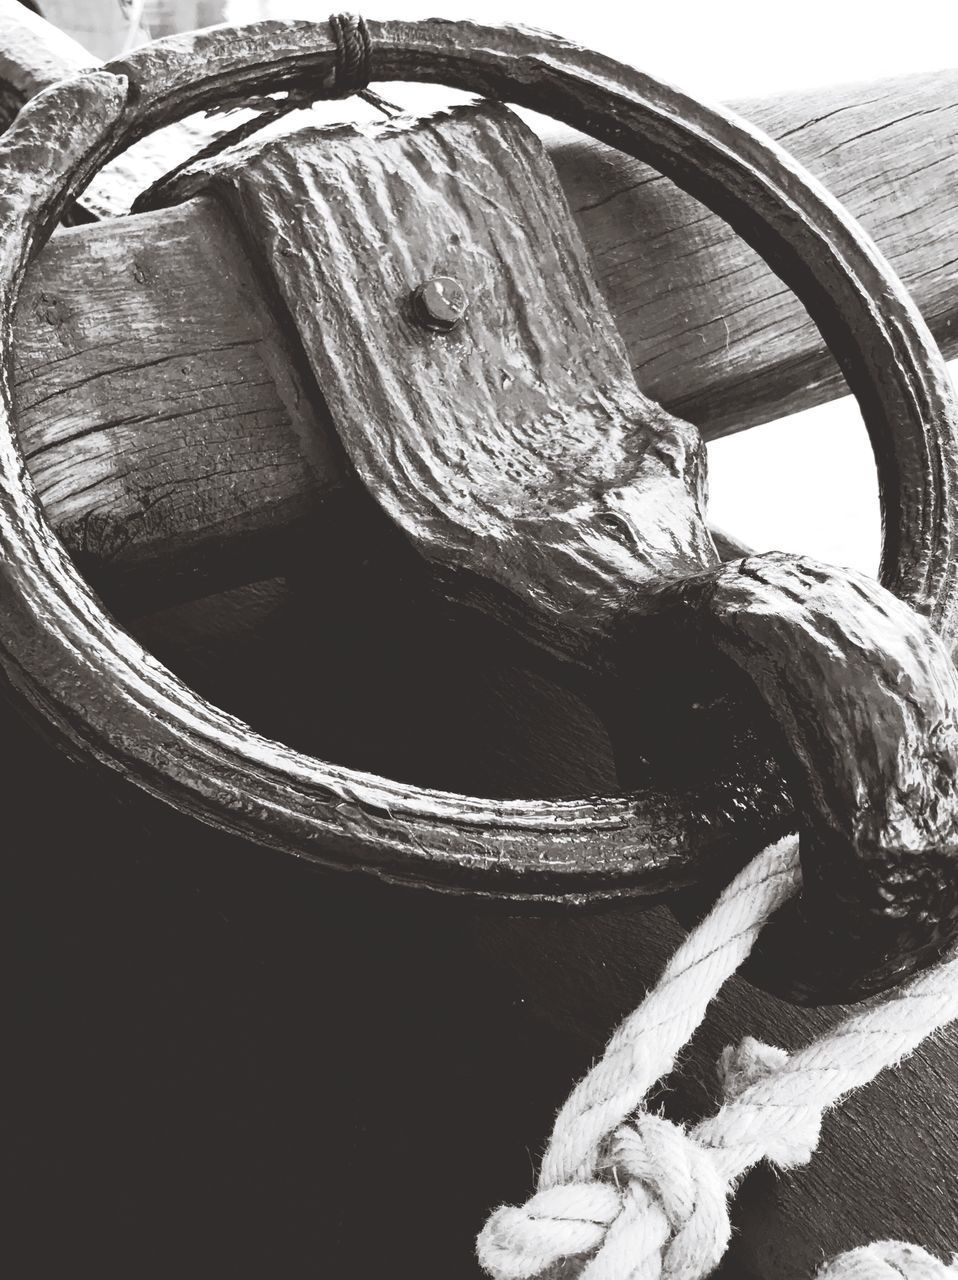 CLOSE-UP OF ROPE AGAINST BOAT